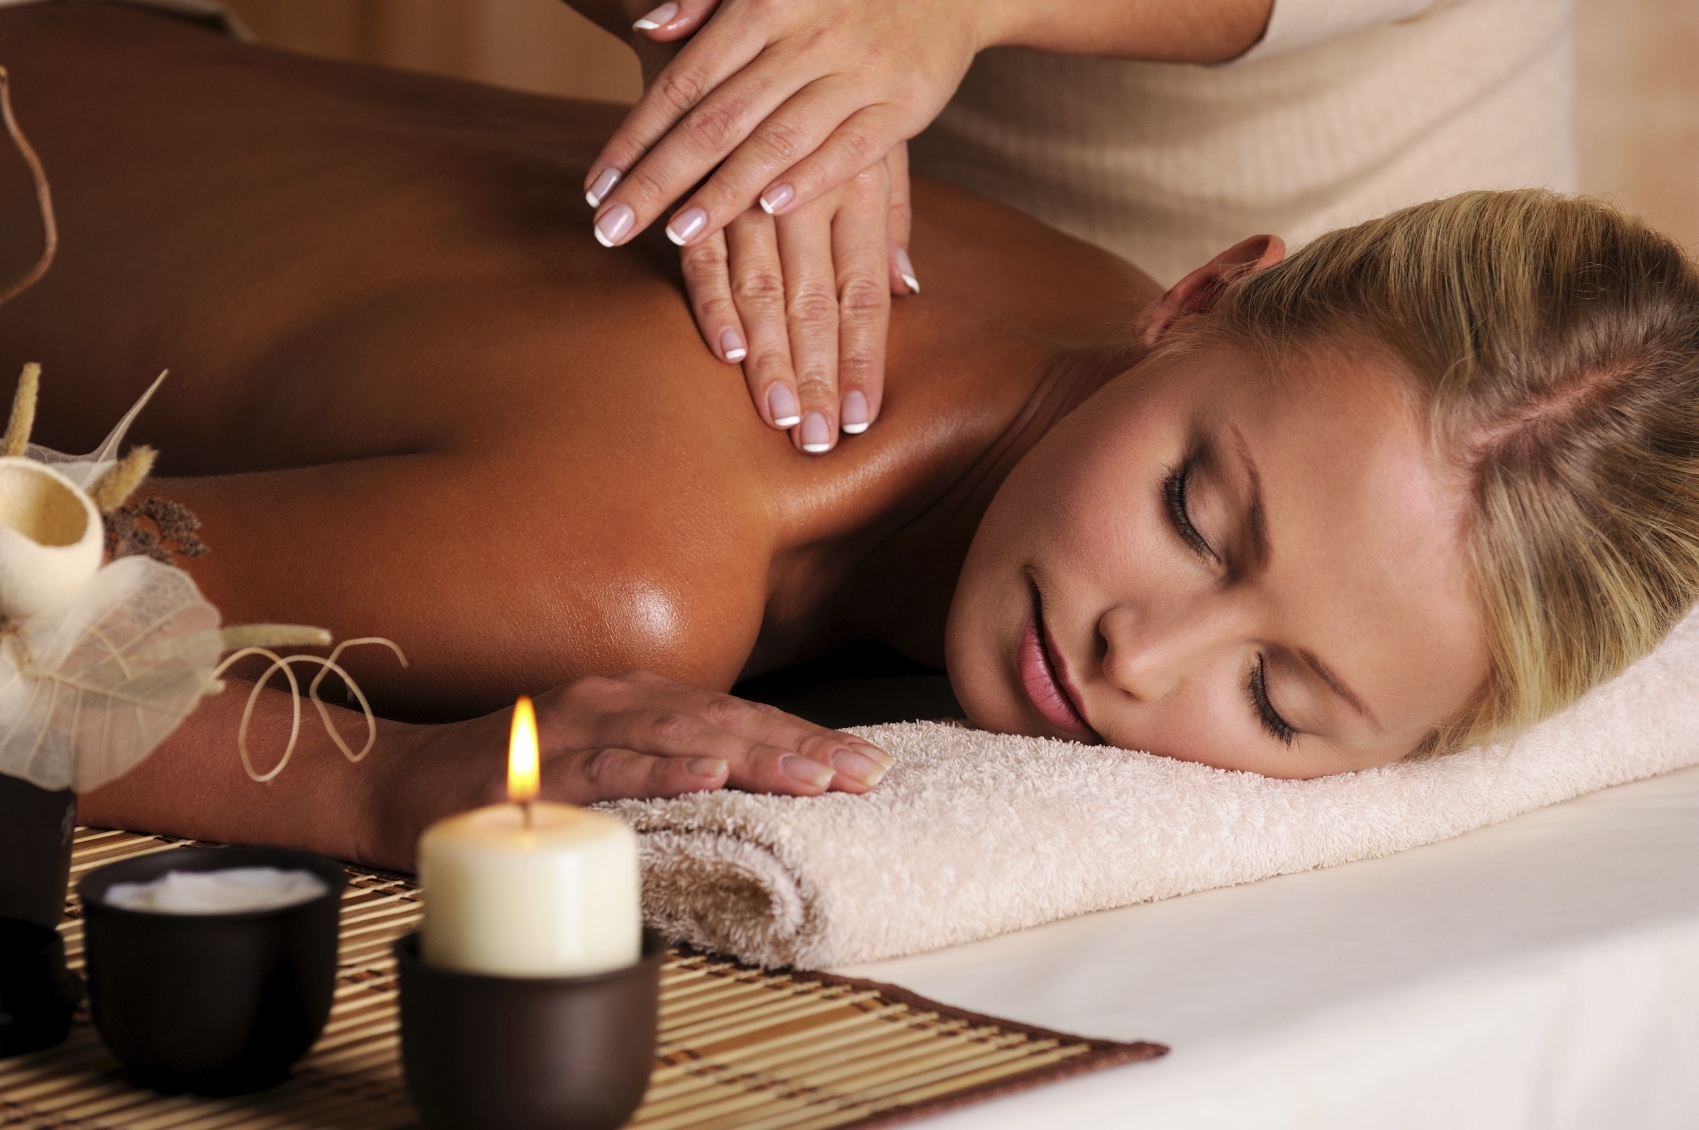 Featured image for “Massage Therapy Franchise for Sale”